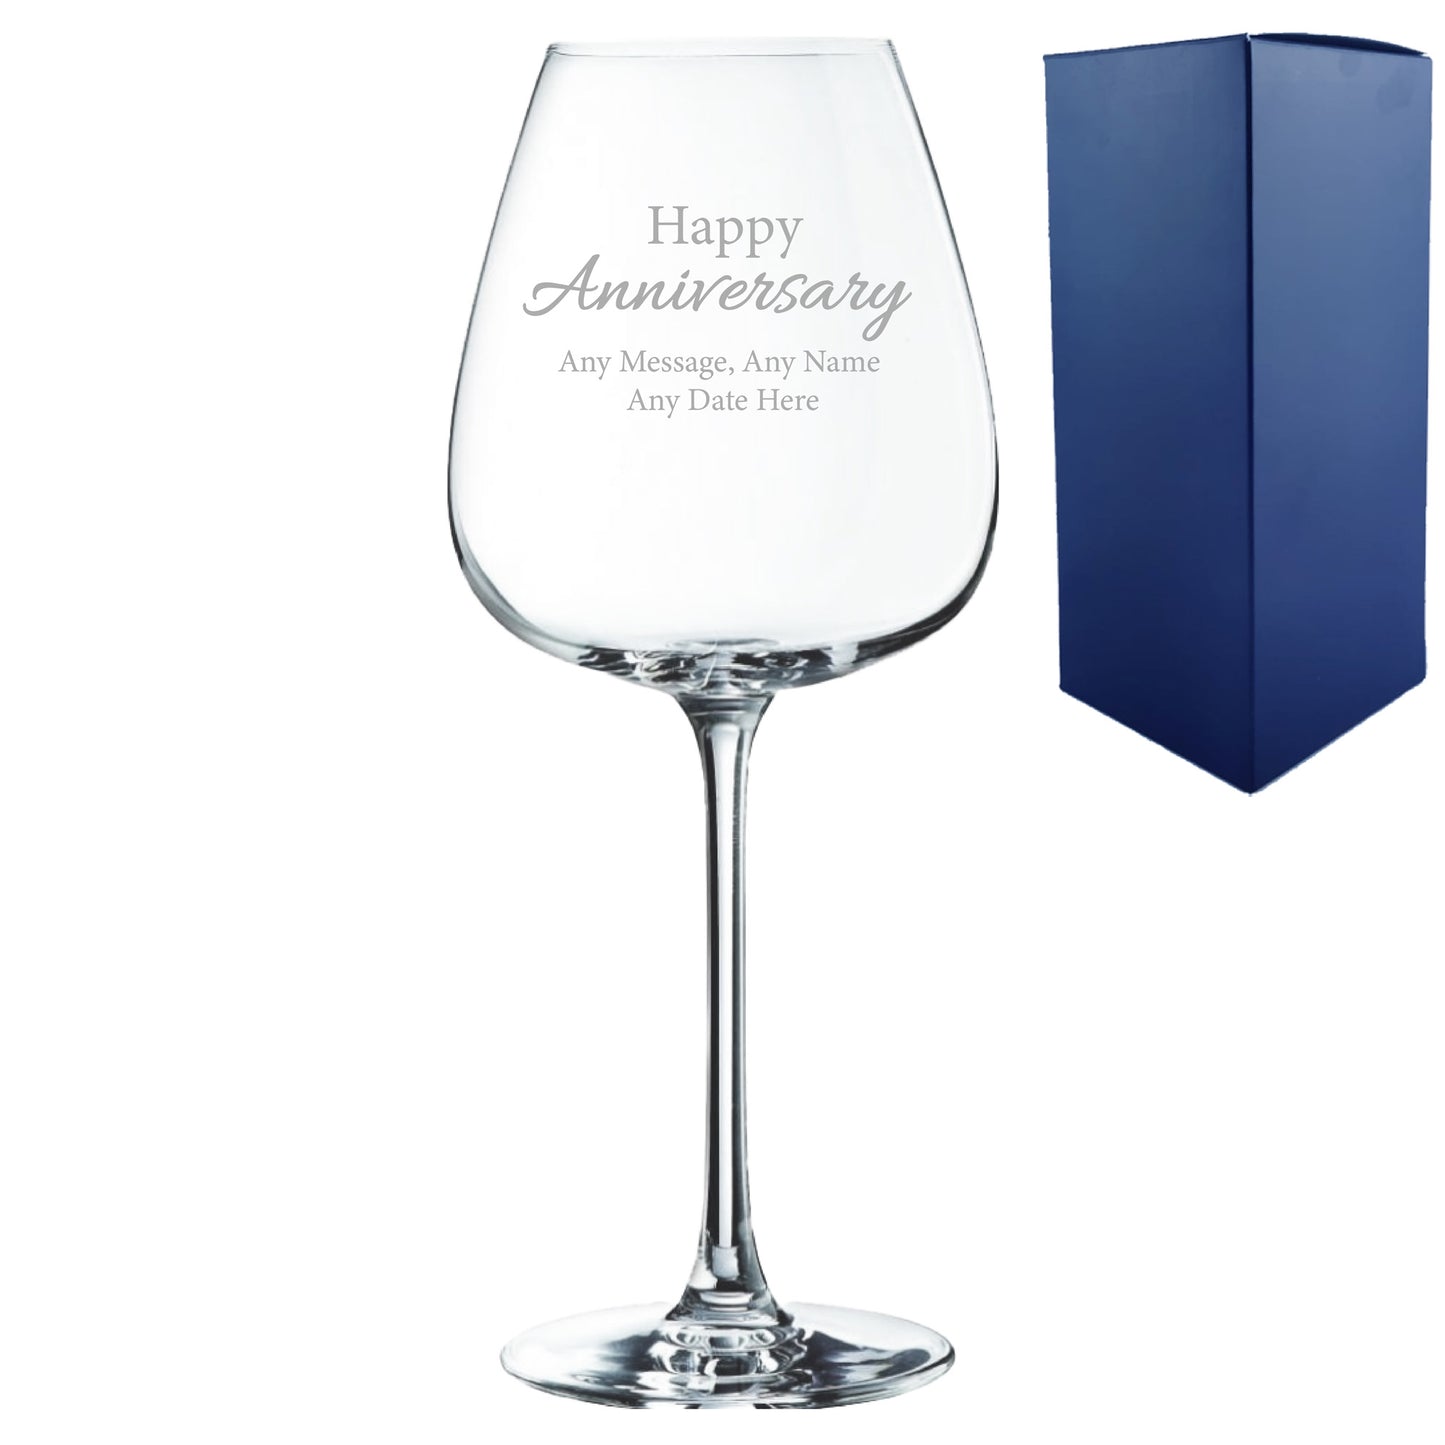 Engraved Happy Anniversary Wine Glass, Any Message, 12oz Cepages, Handwritten Design Image 2